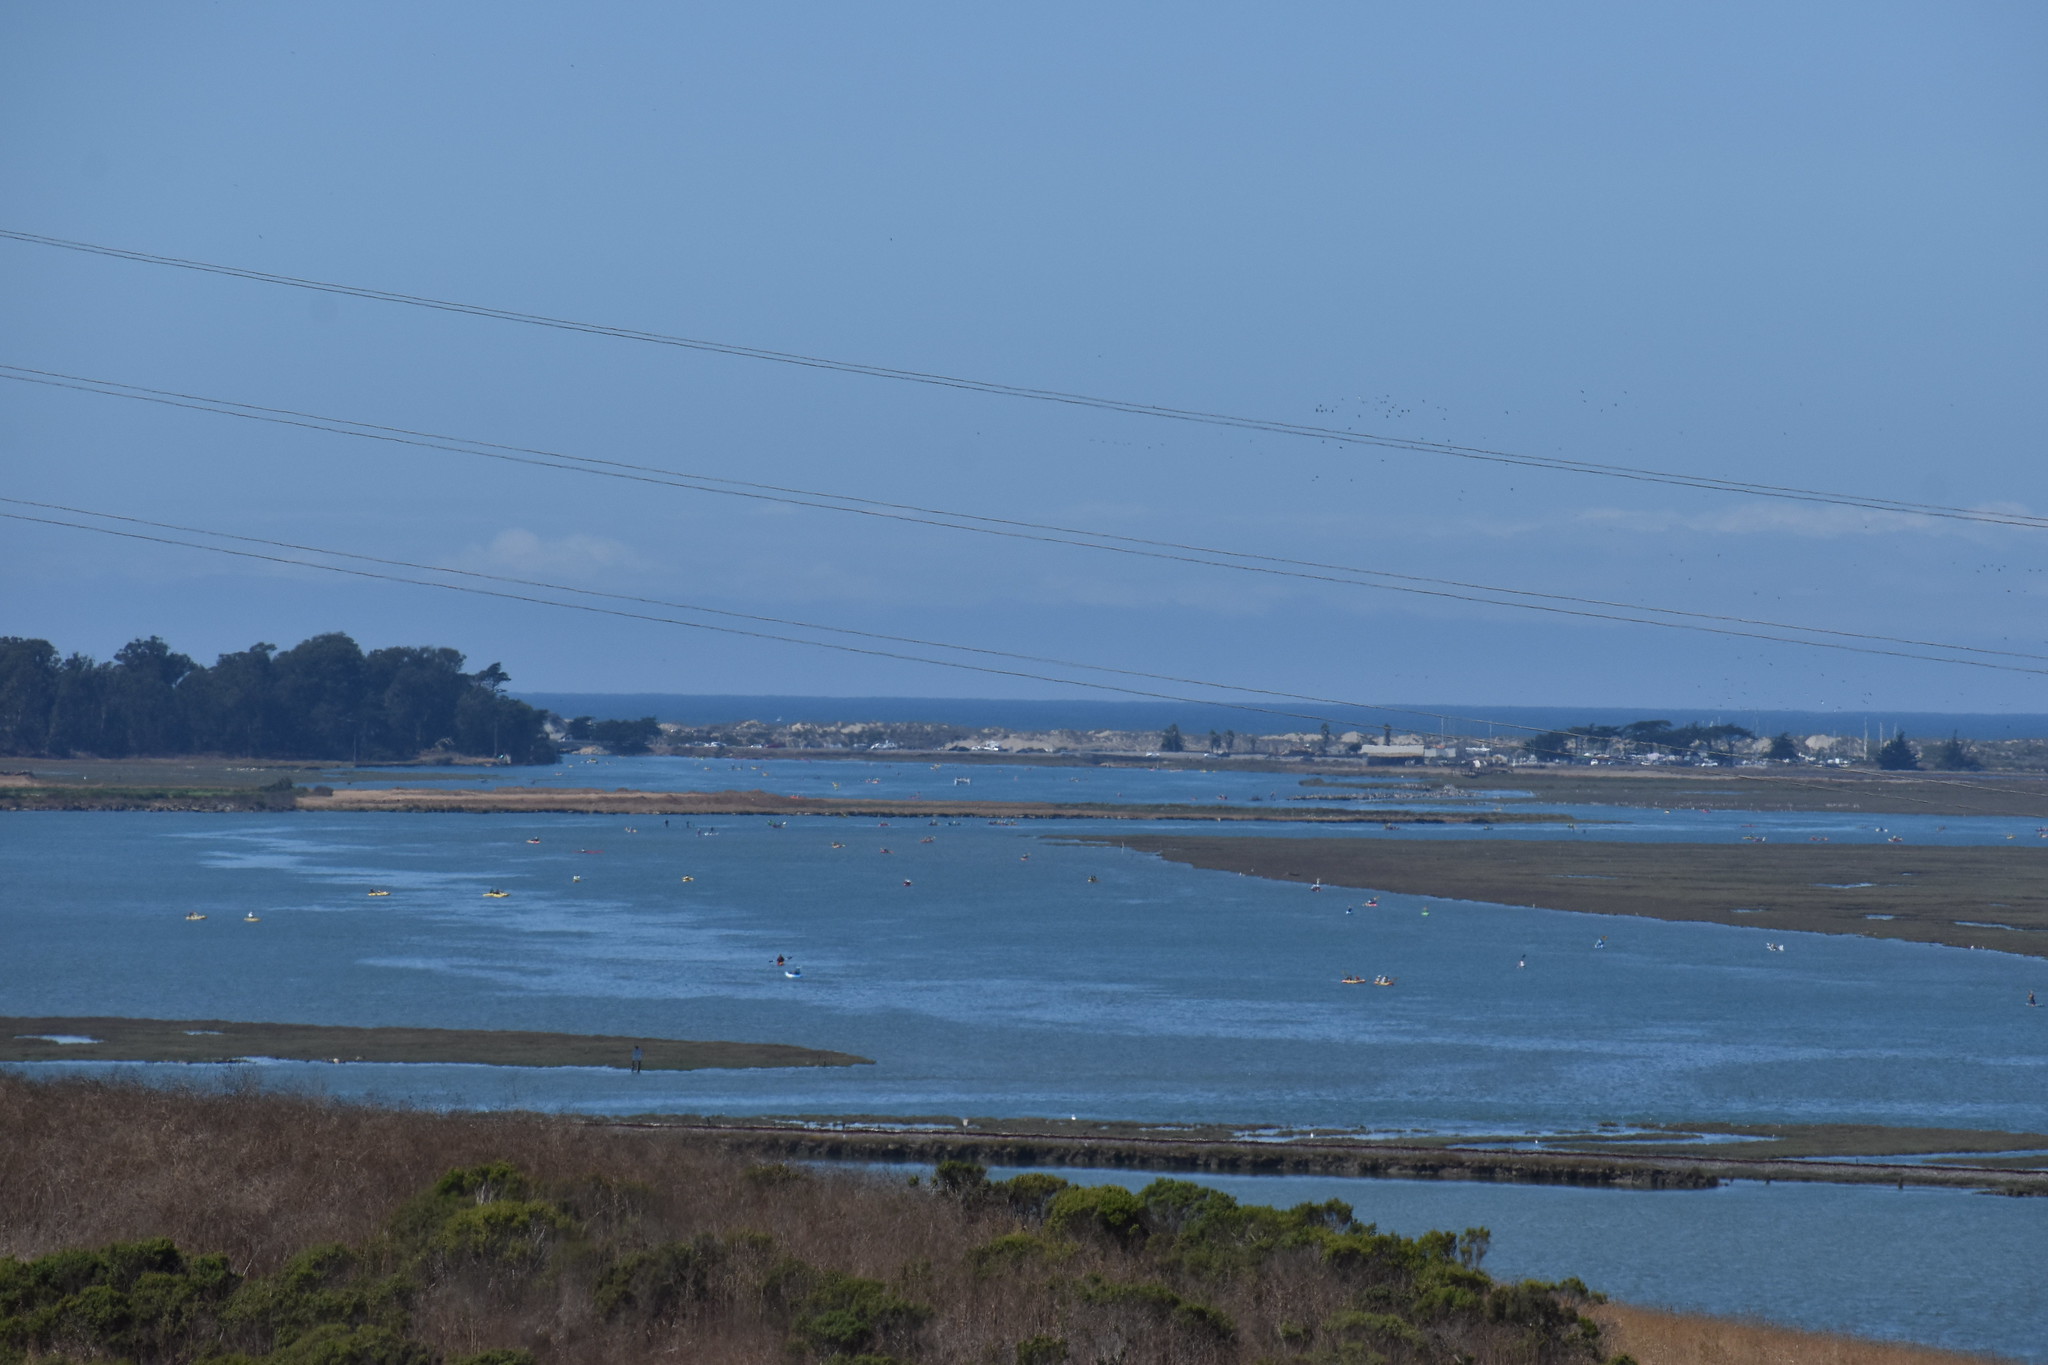 Kayakers in the distance on Elkhorn Slough